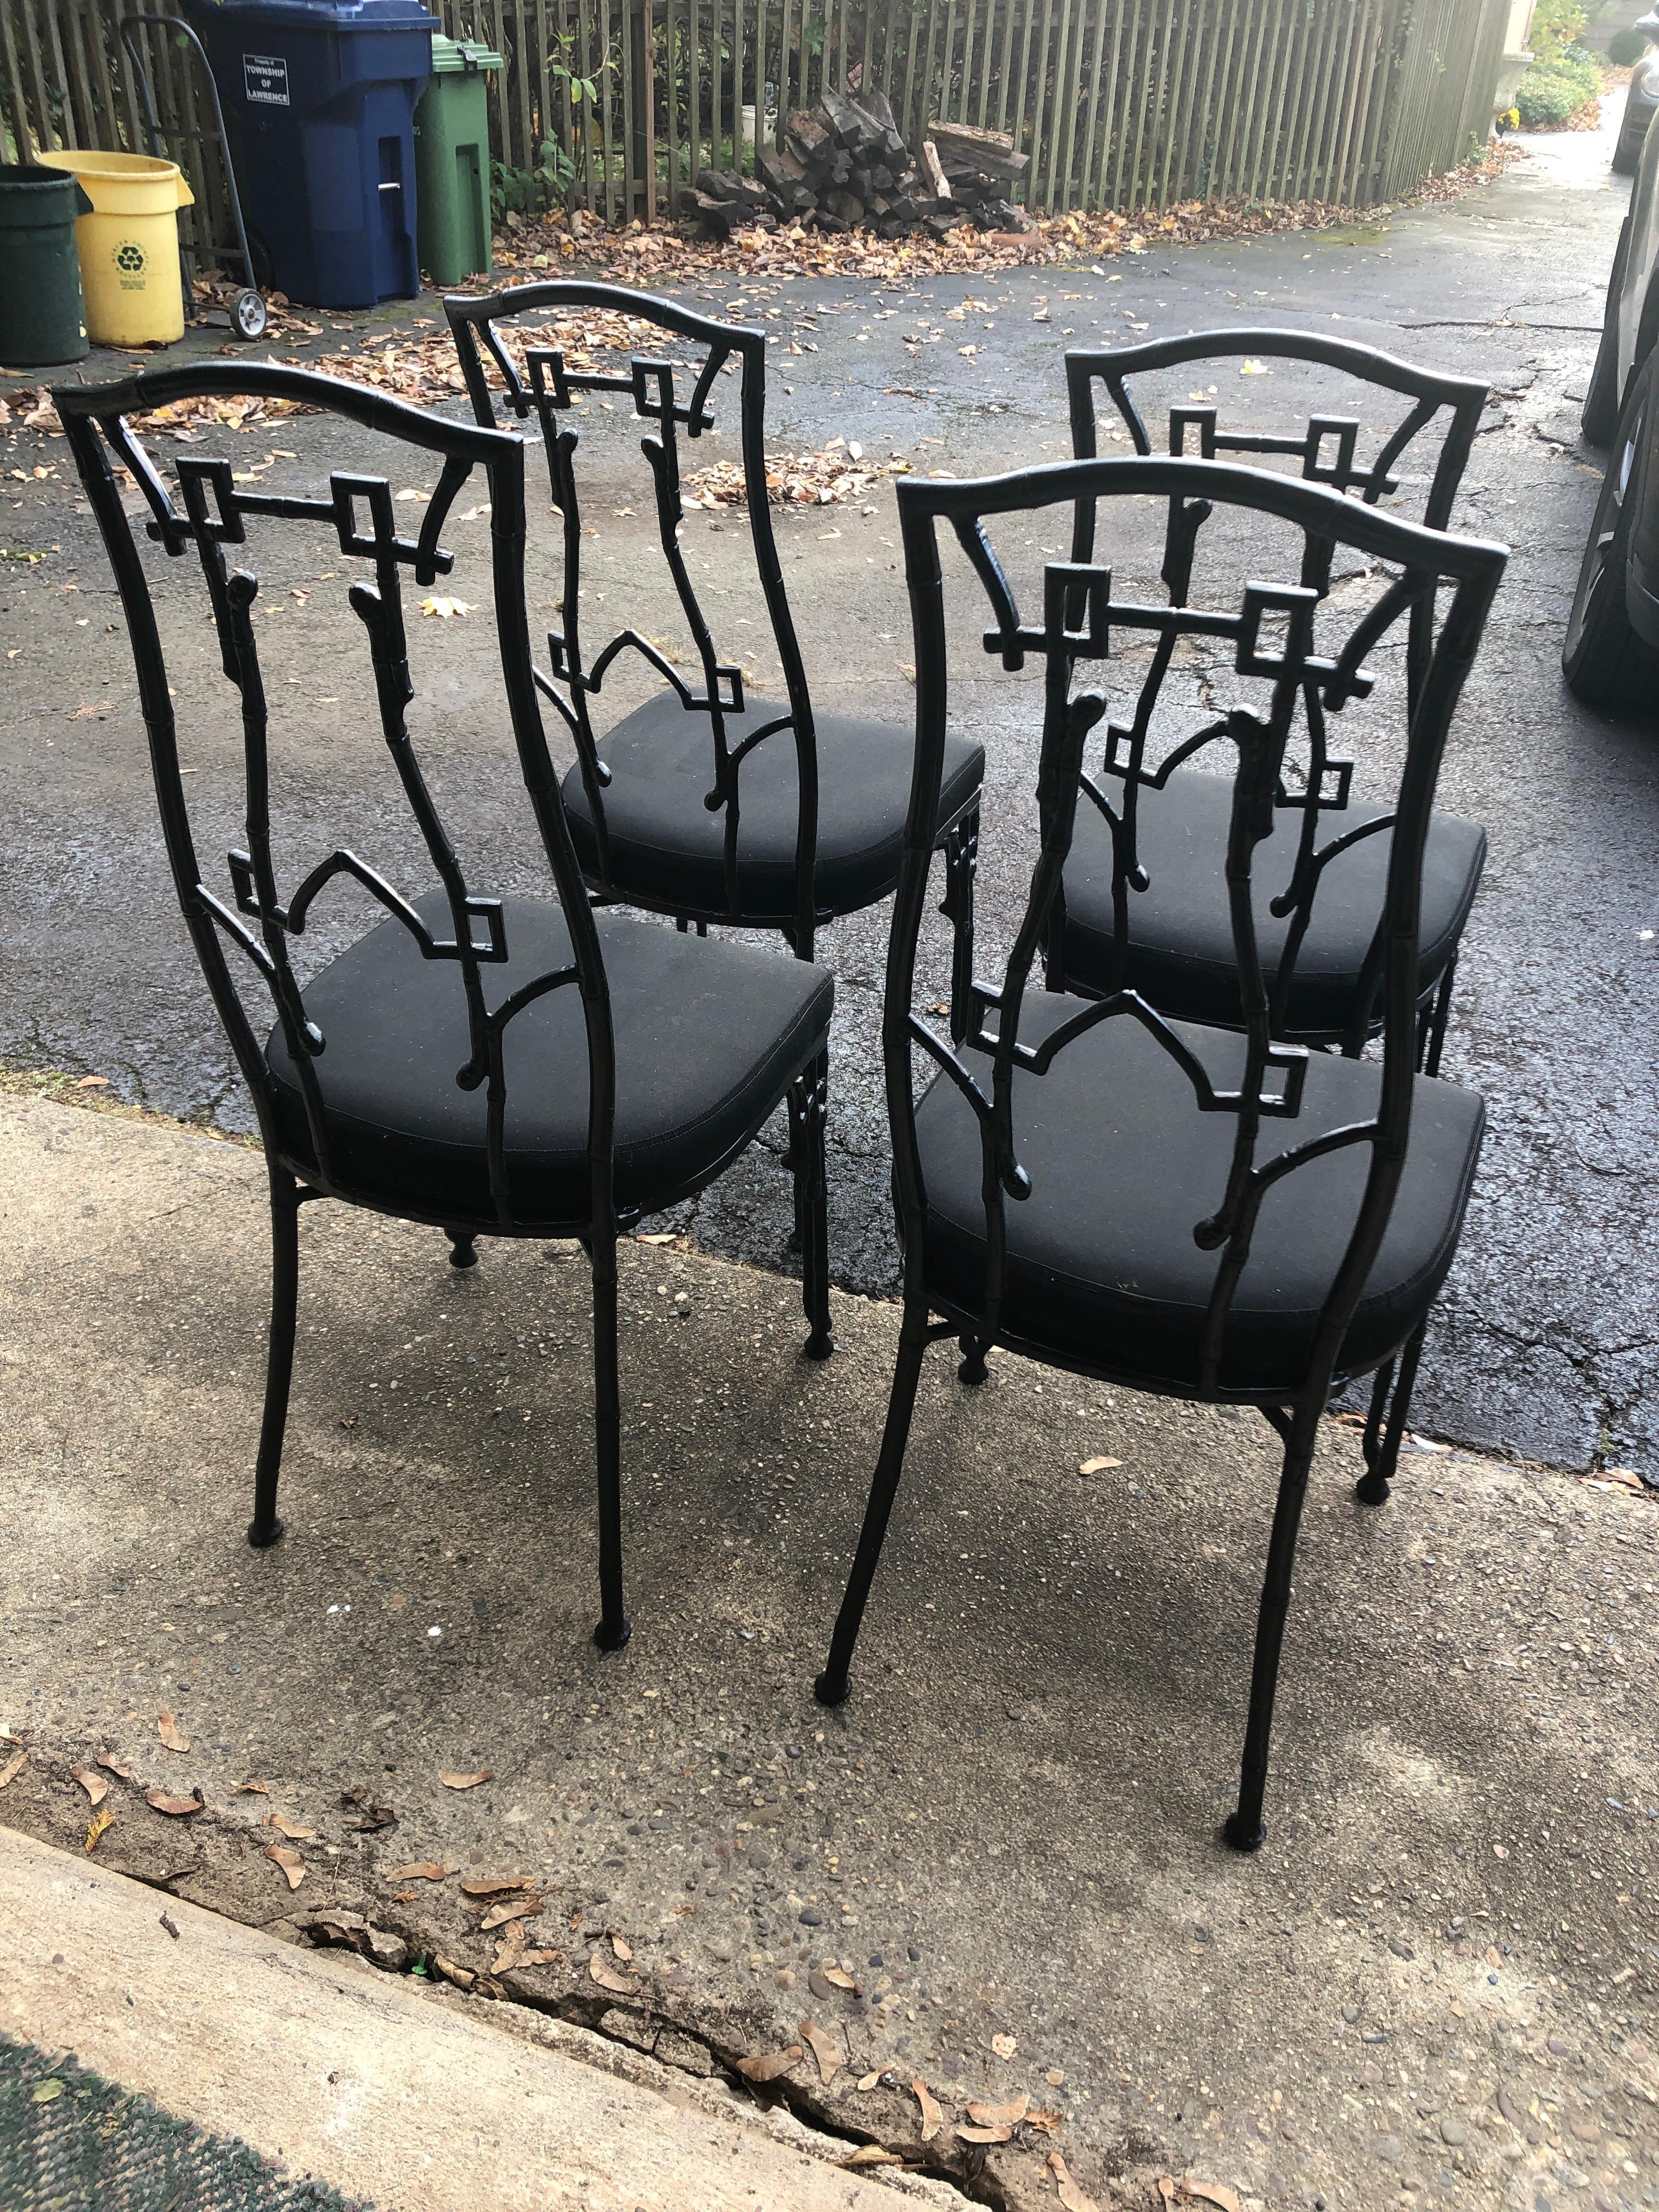 Set of 4 chic black painted iron patio chairs having a stylish chinoiserie silhouette. Upholstered seats are Sunbrella, but a bit tired. Priced accordingly.